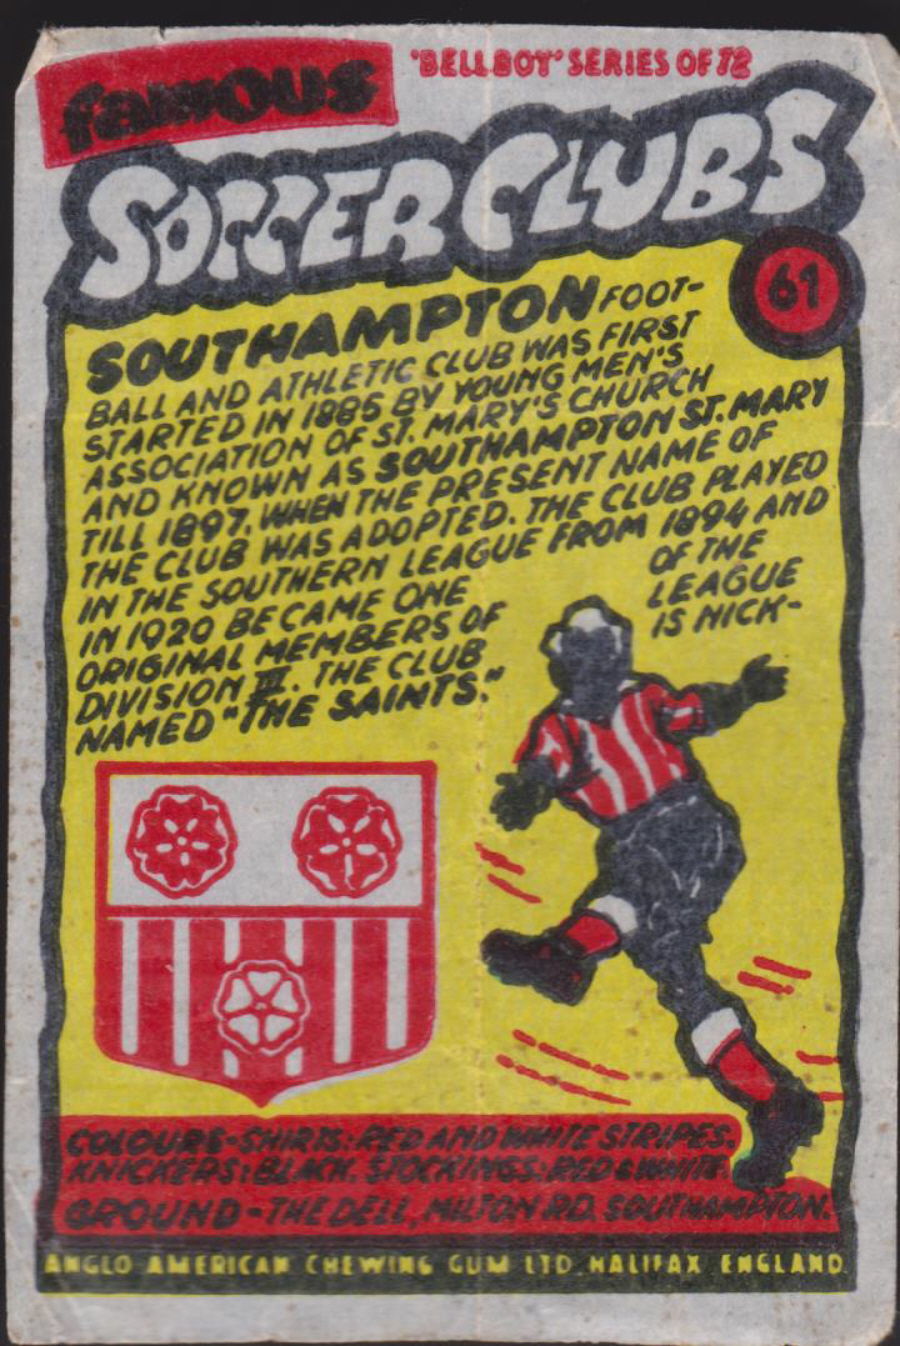 Anglo-American-Chewing-Gum-Wax-Wrapper-Famous-Soccer-Clubs-No-61 - Southampton